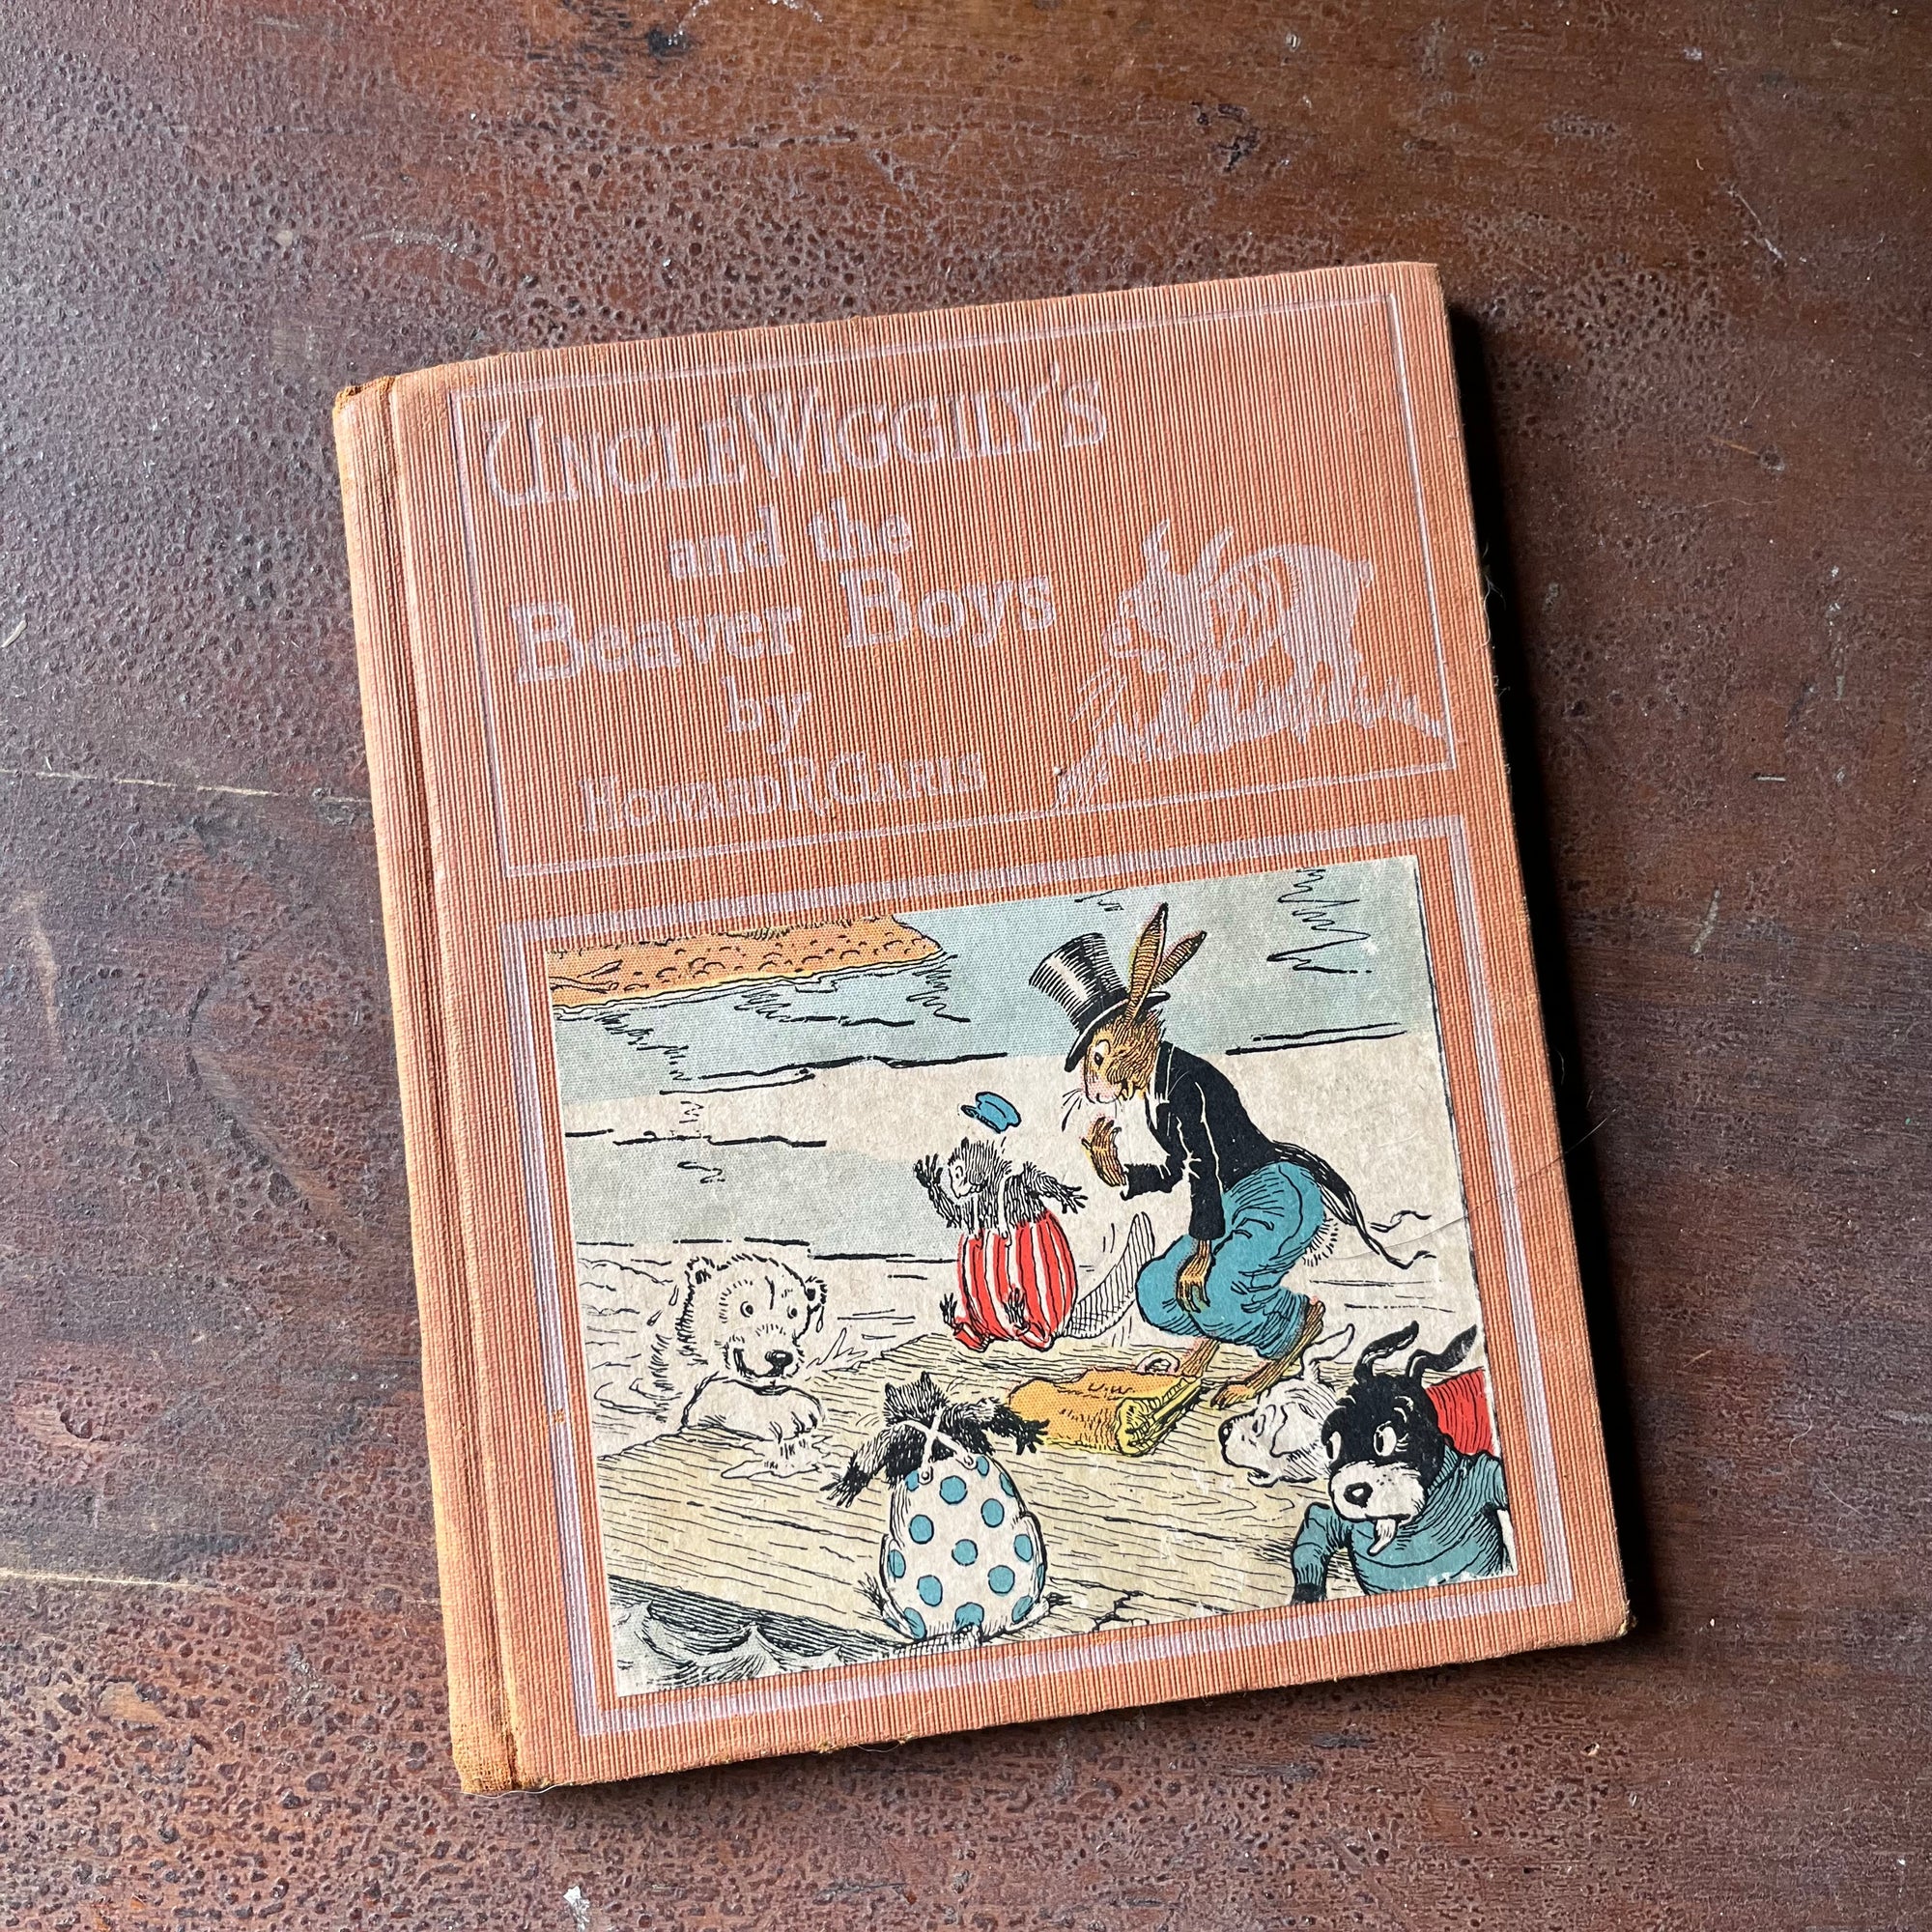 Uncle Wiggily's and the Beaver Boys by Howard R. Garis - 1929 Edition - view of the front cover